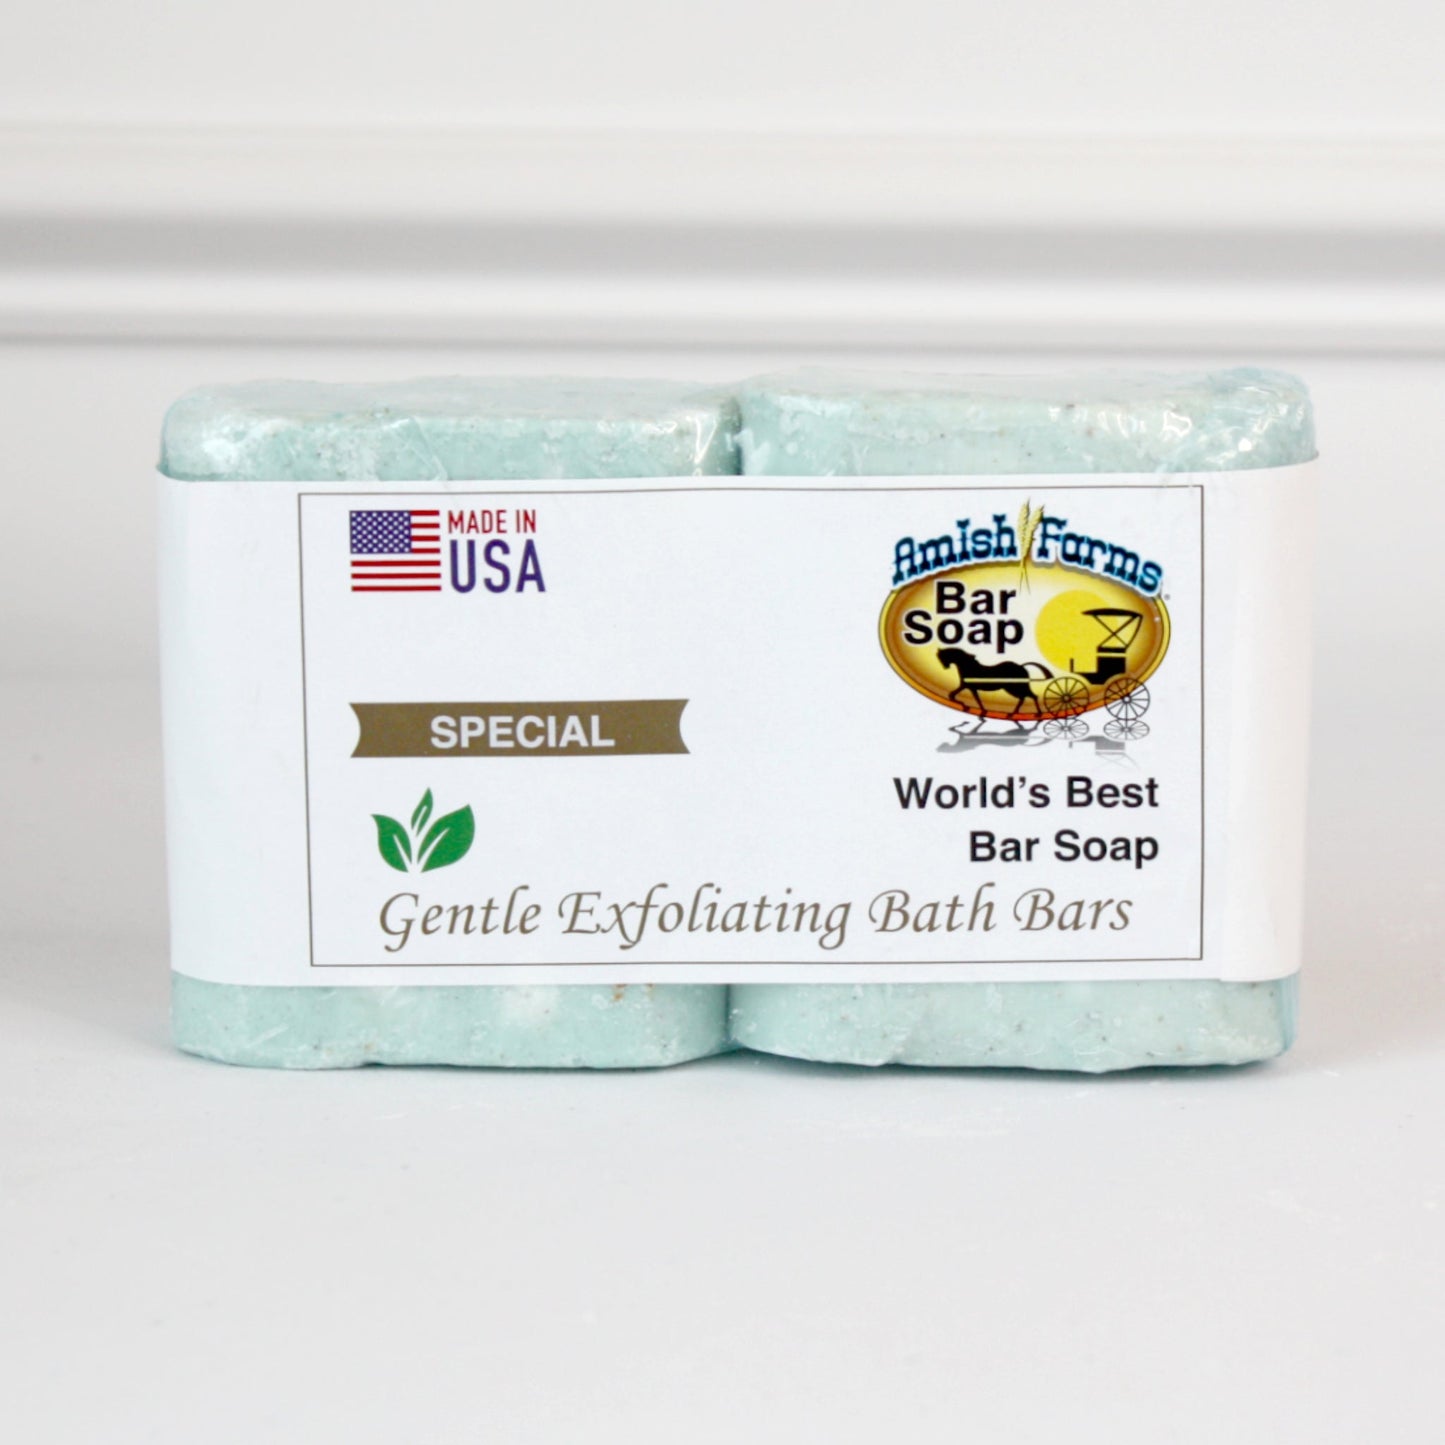 Amish Farms 2 Gentle Exfoliating Bath Bars - Made in the USA